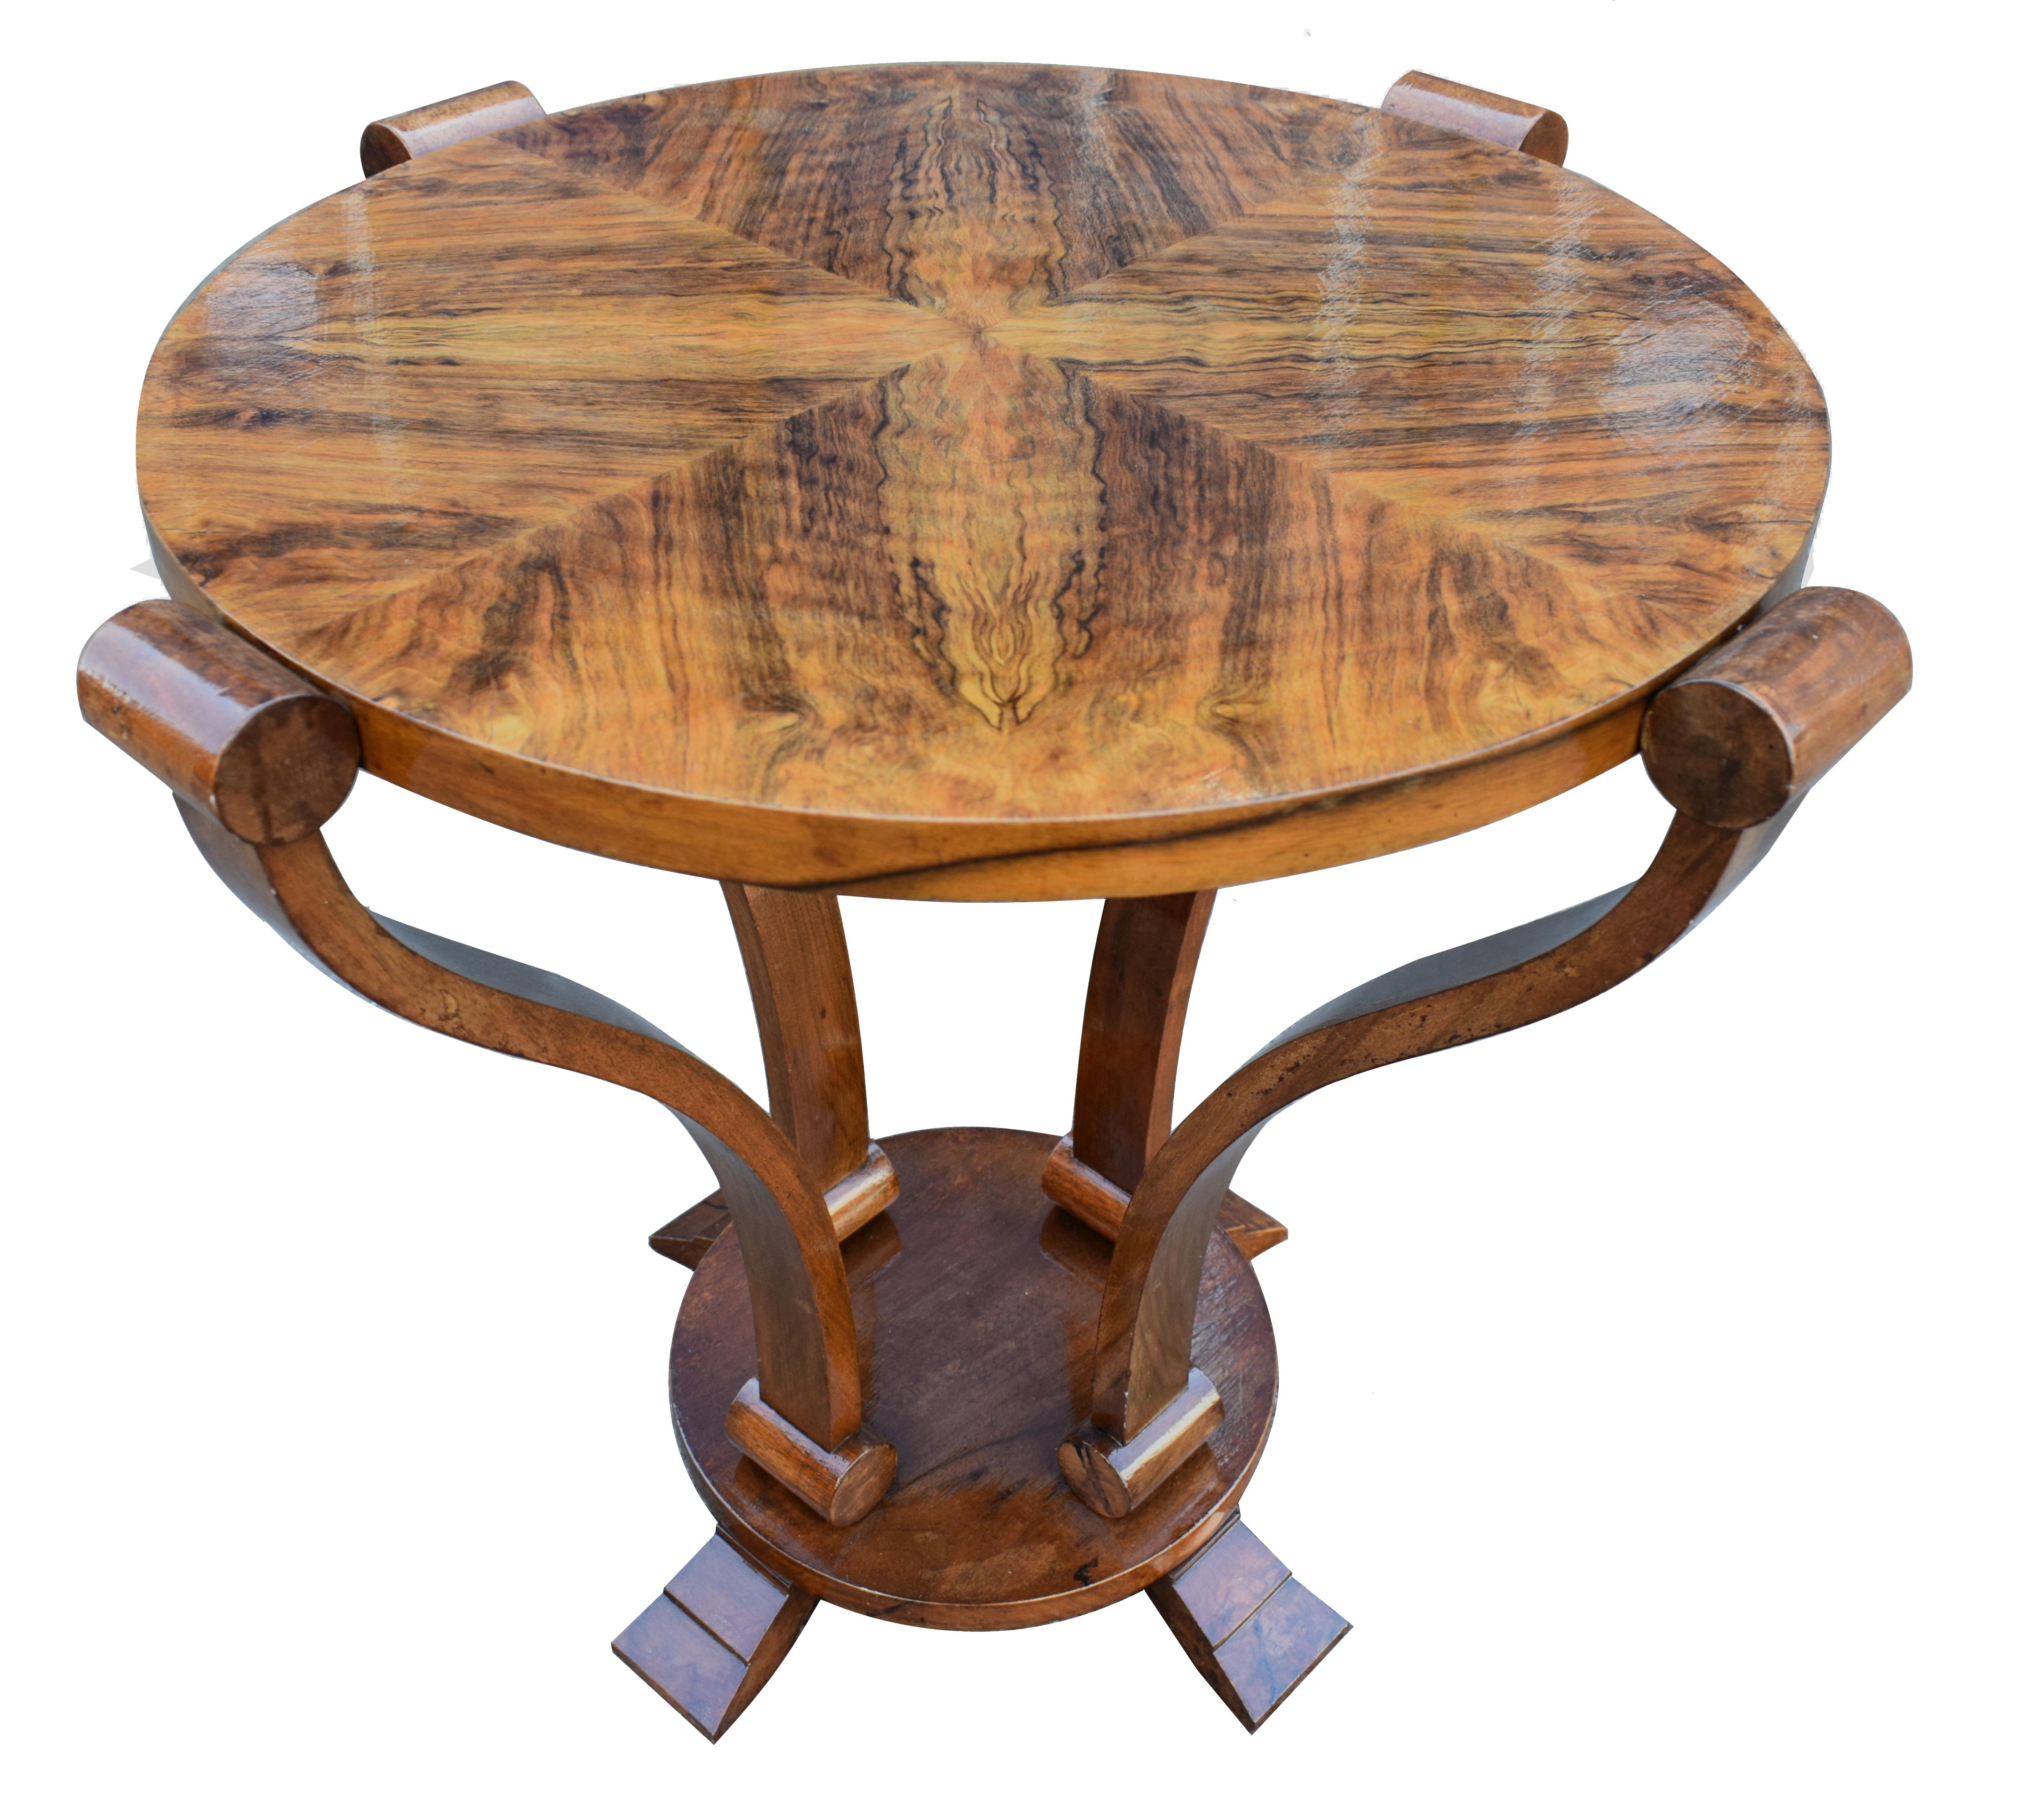 French Art Deco Two-Tier Centre Table in Figured Walnut, circa 1930